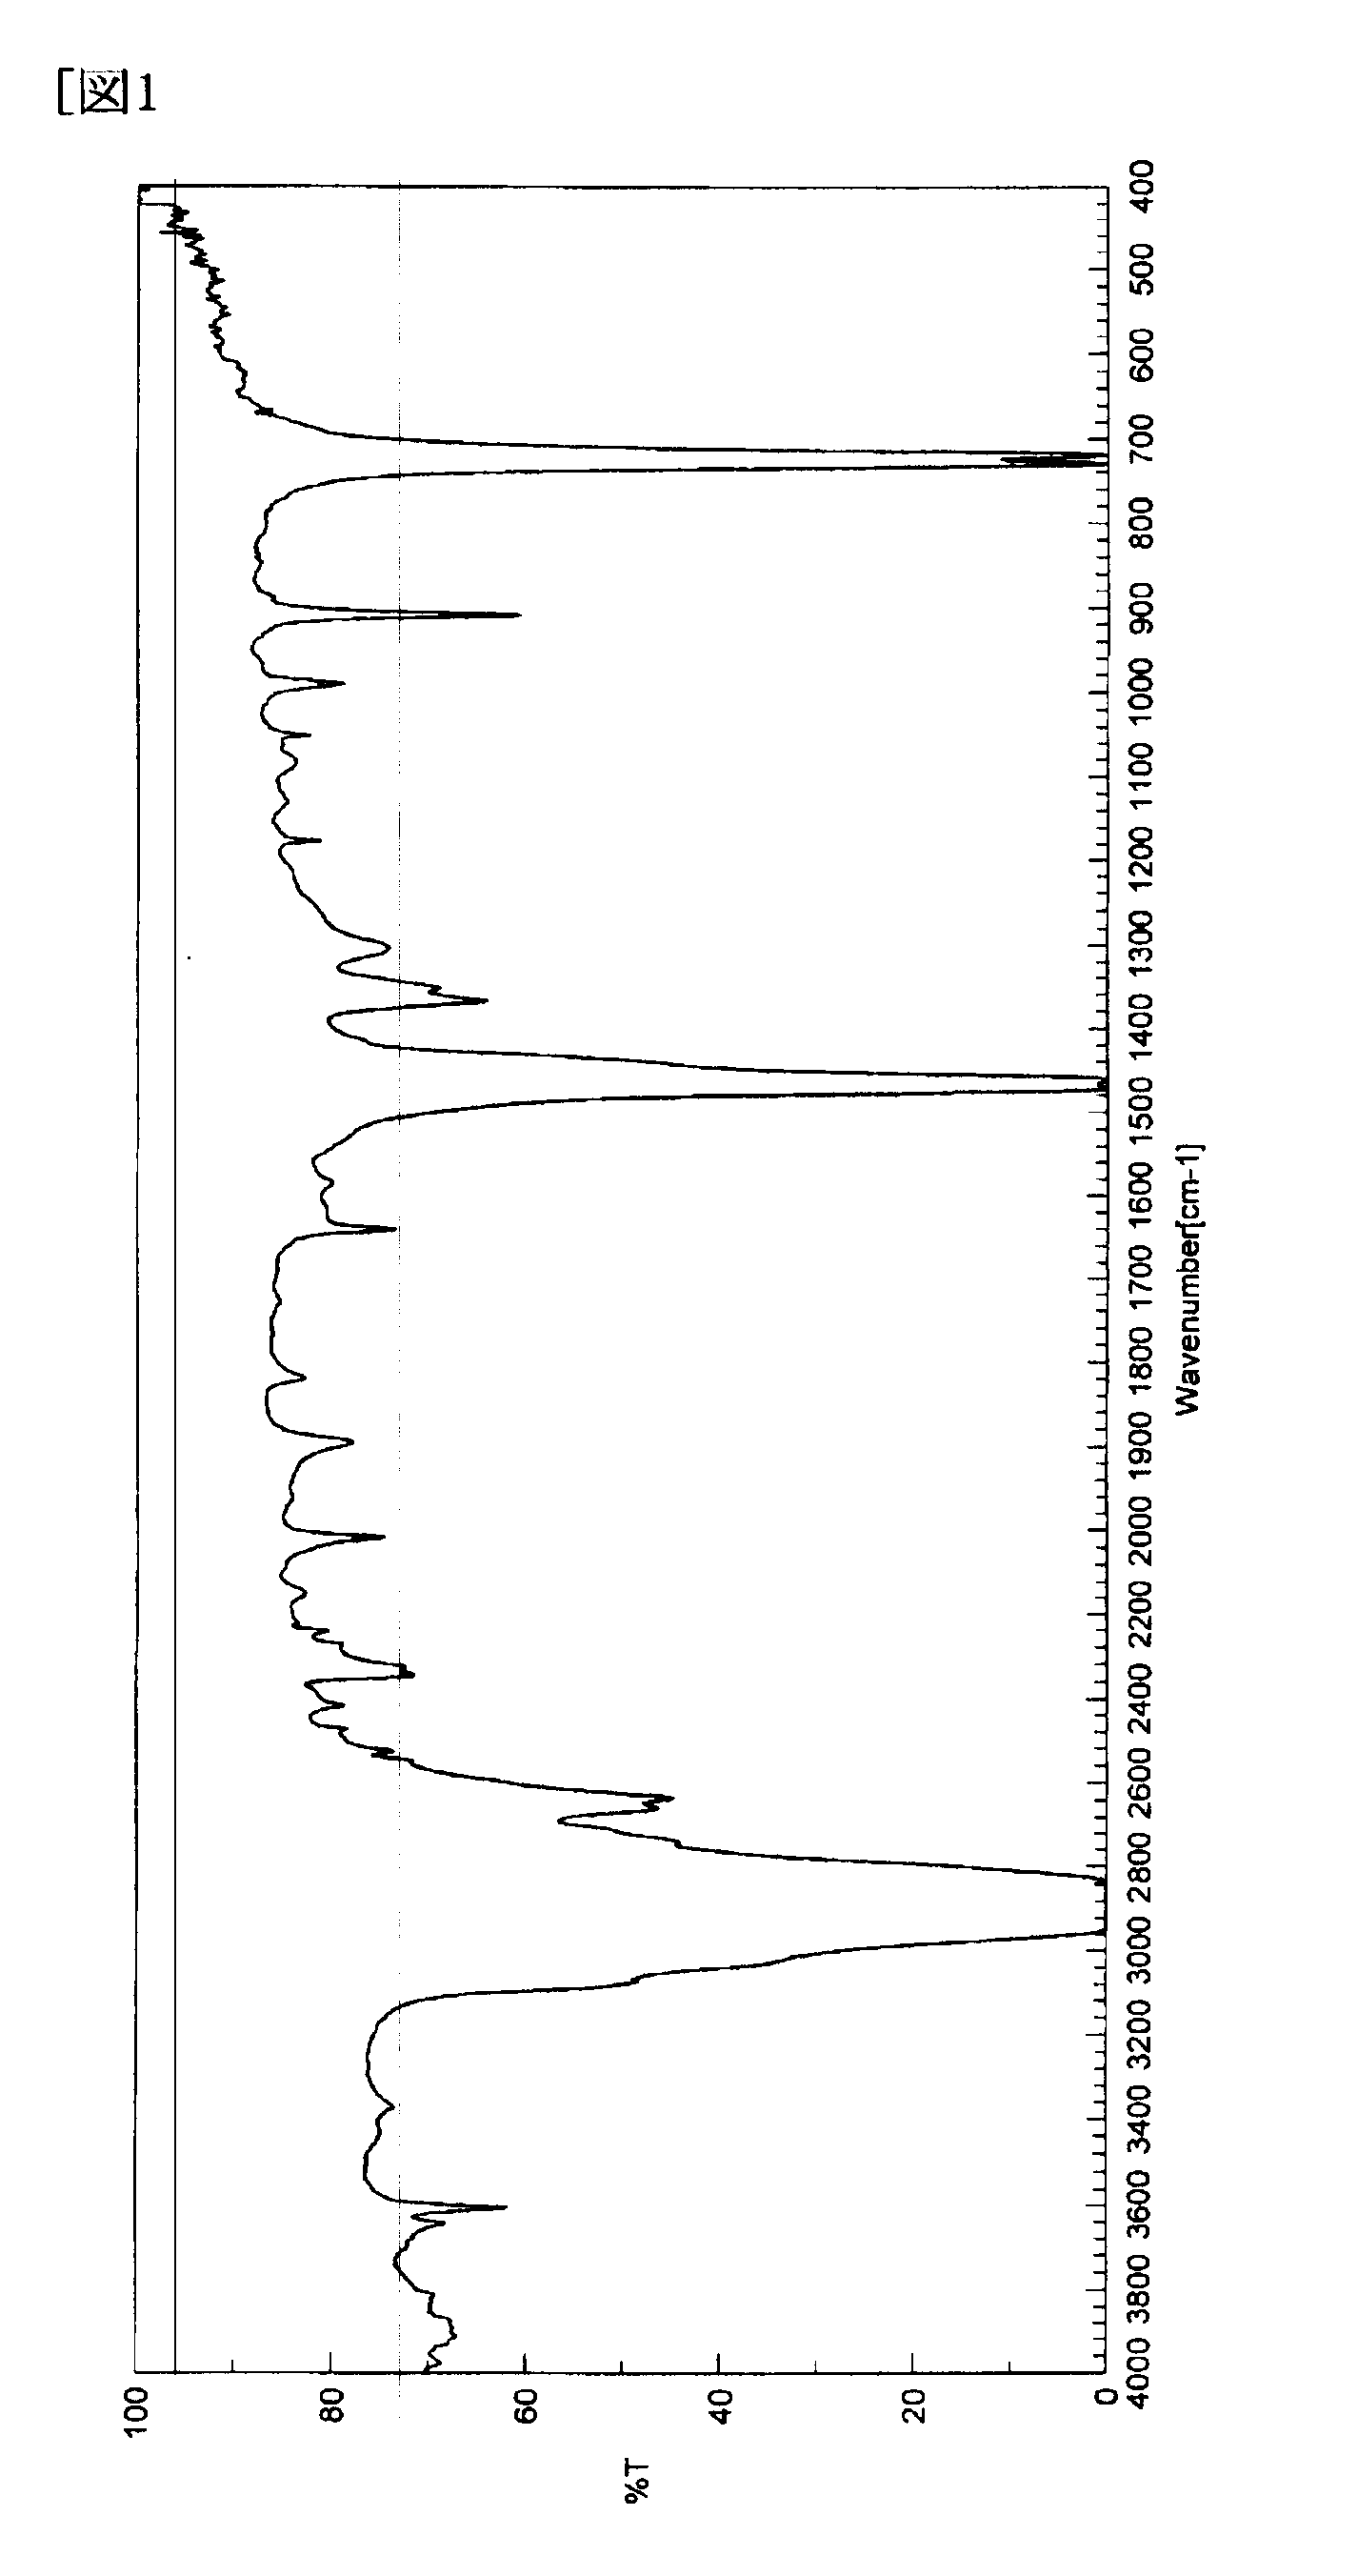 Ethylene-Based Polymer Microparticles, Functional Group-Containing Ethylene-Based Polymer Microparticles,and Catalyst Carriers for Manufacture Thereof